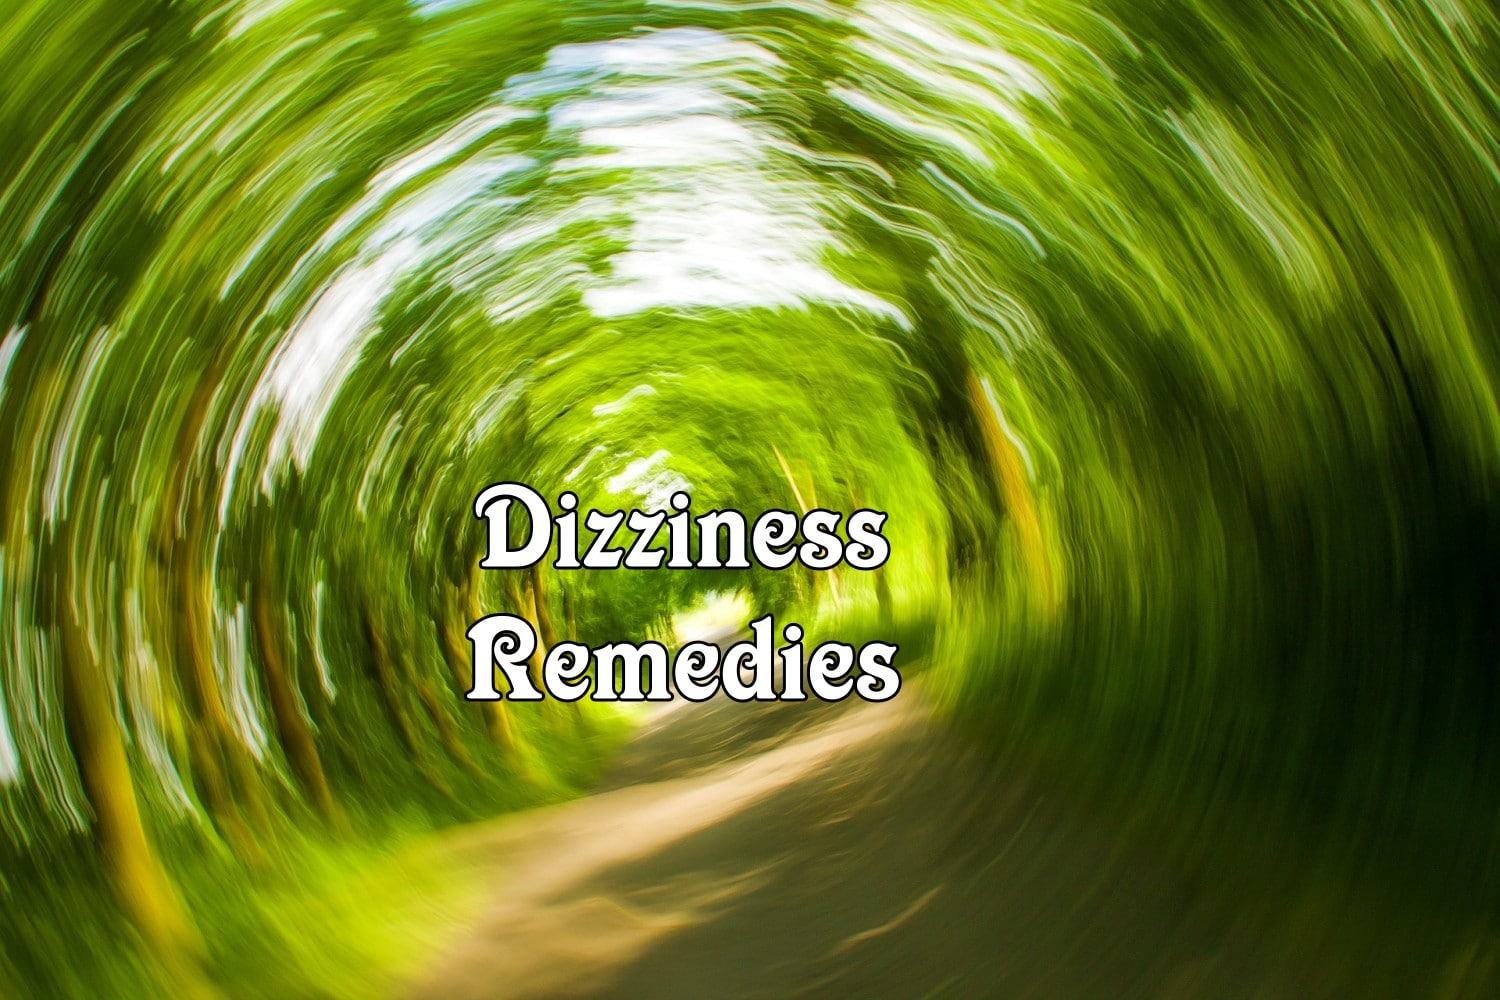 10 Home Remedies for Dizziness